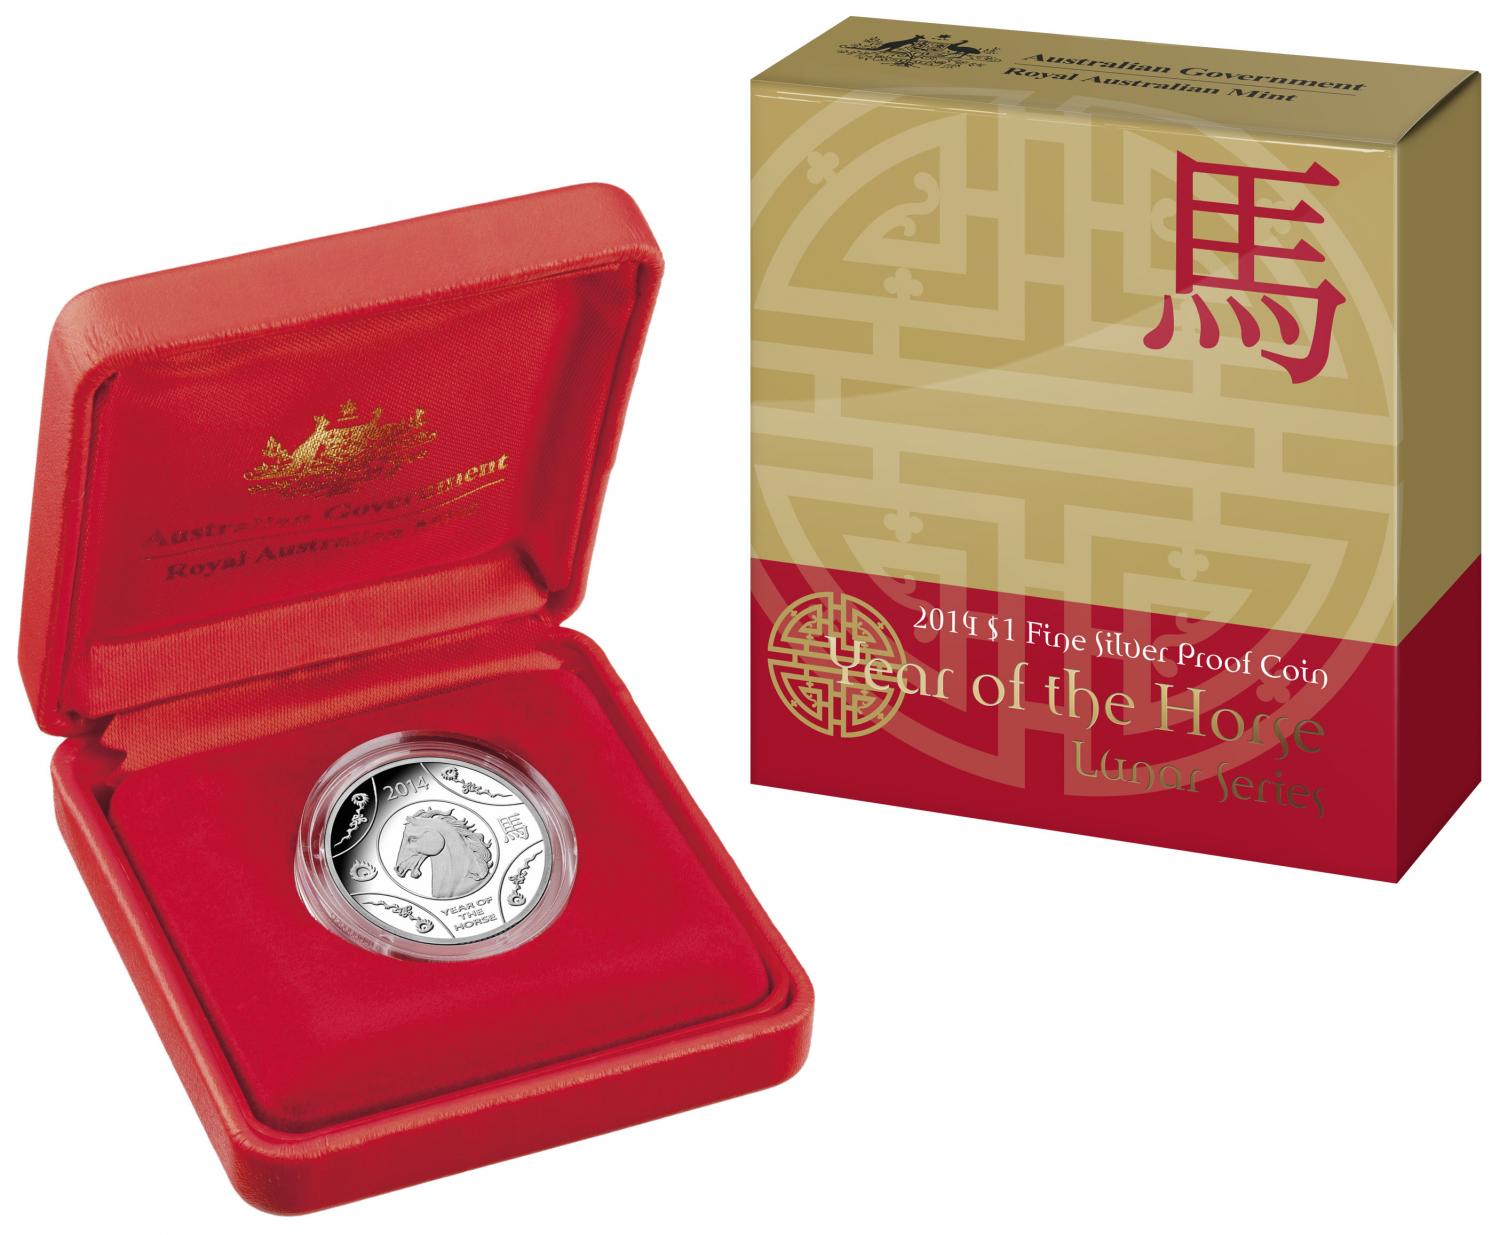 Thumbnail for 2014 Lunar Series - Year of the Horse $1 Silver Proof Coin